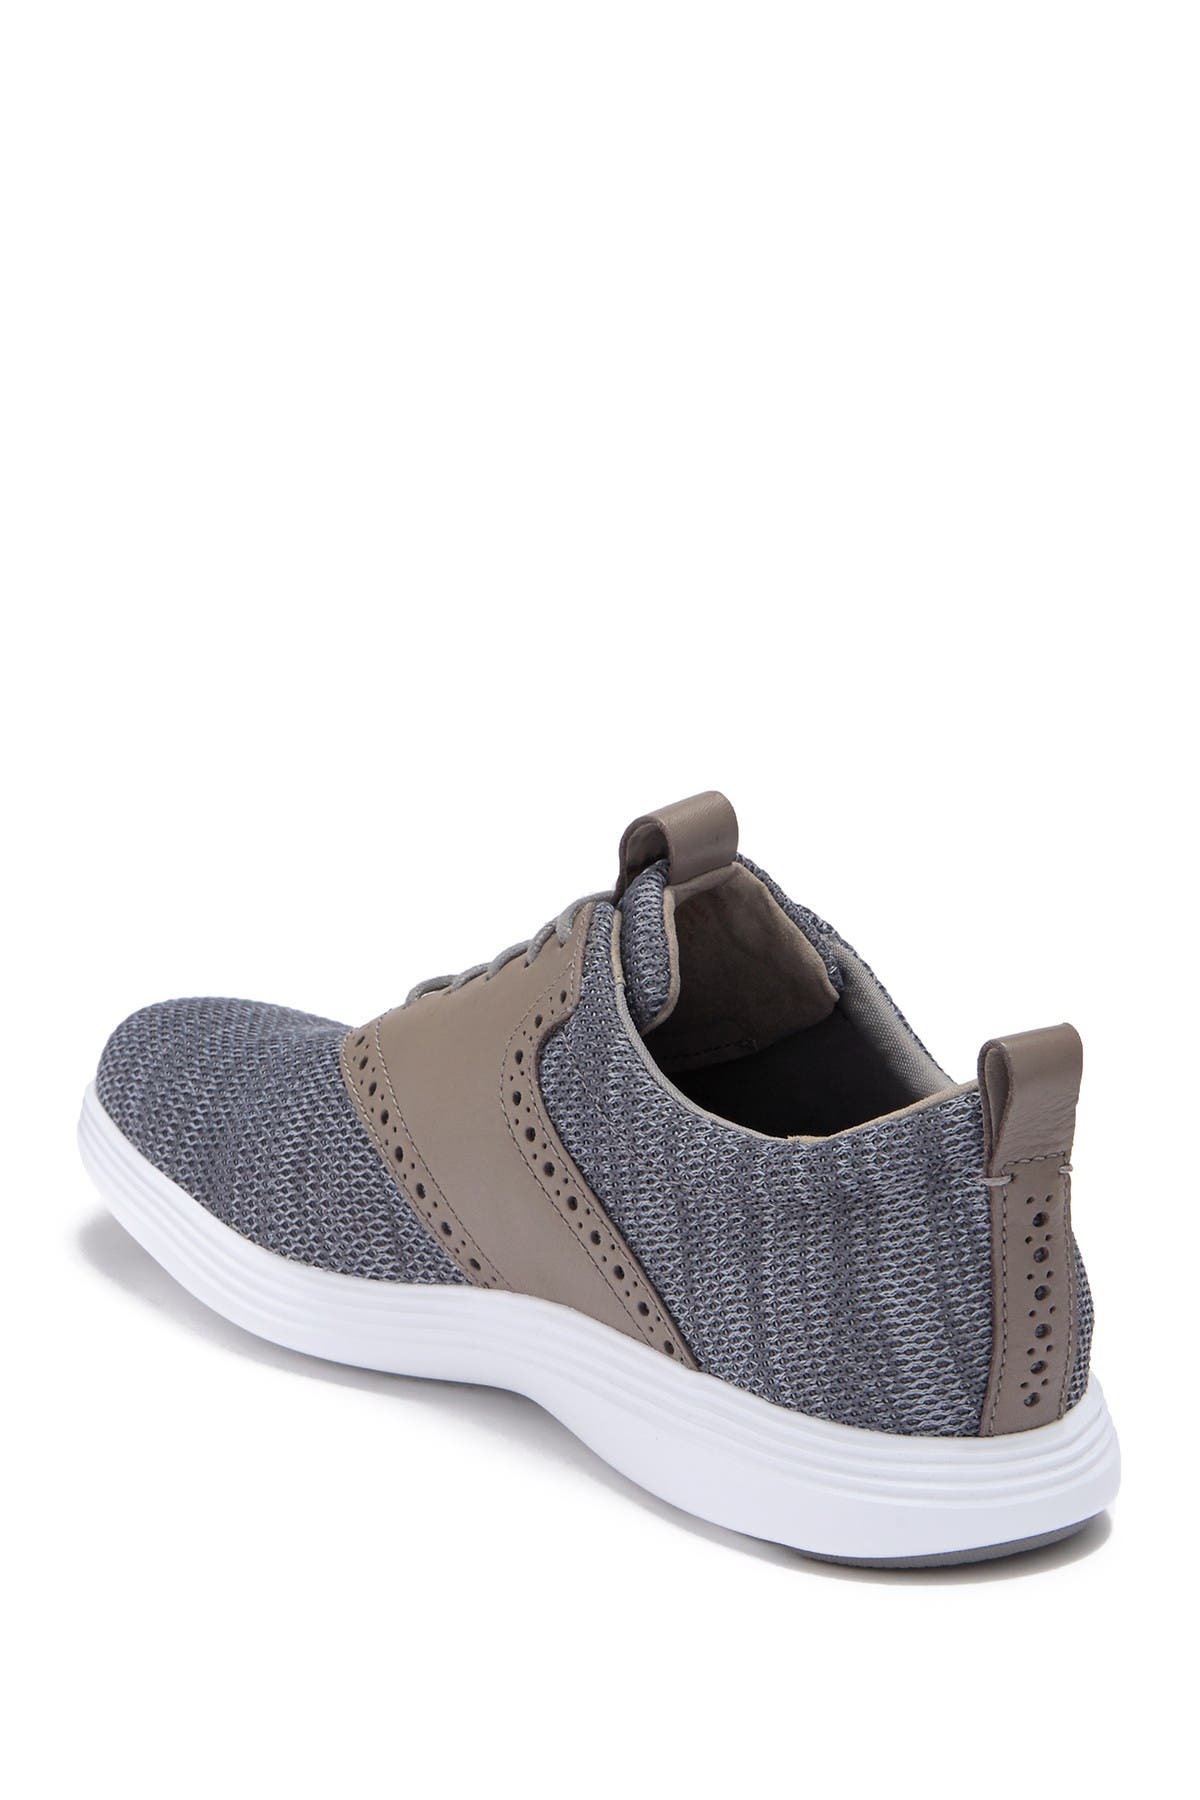 cole haan grand tour knit oxford